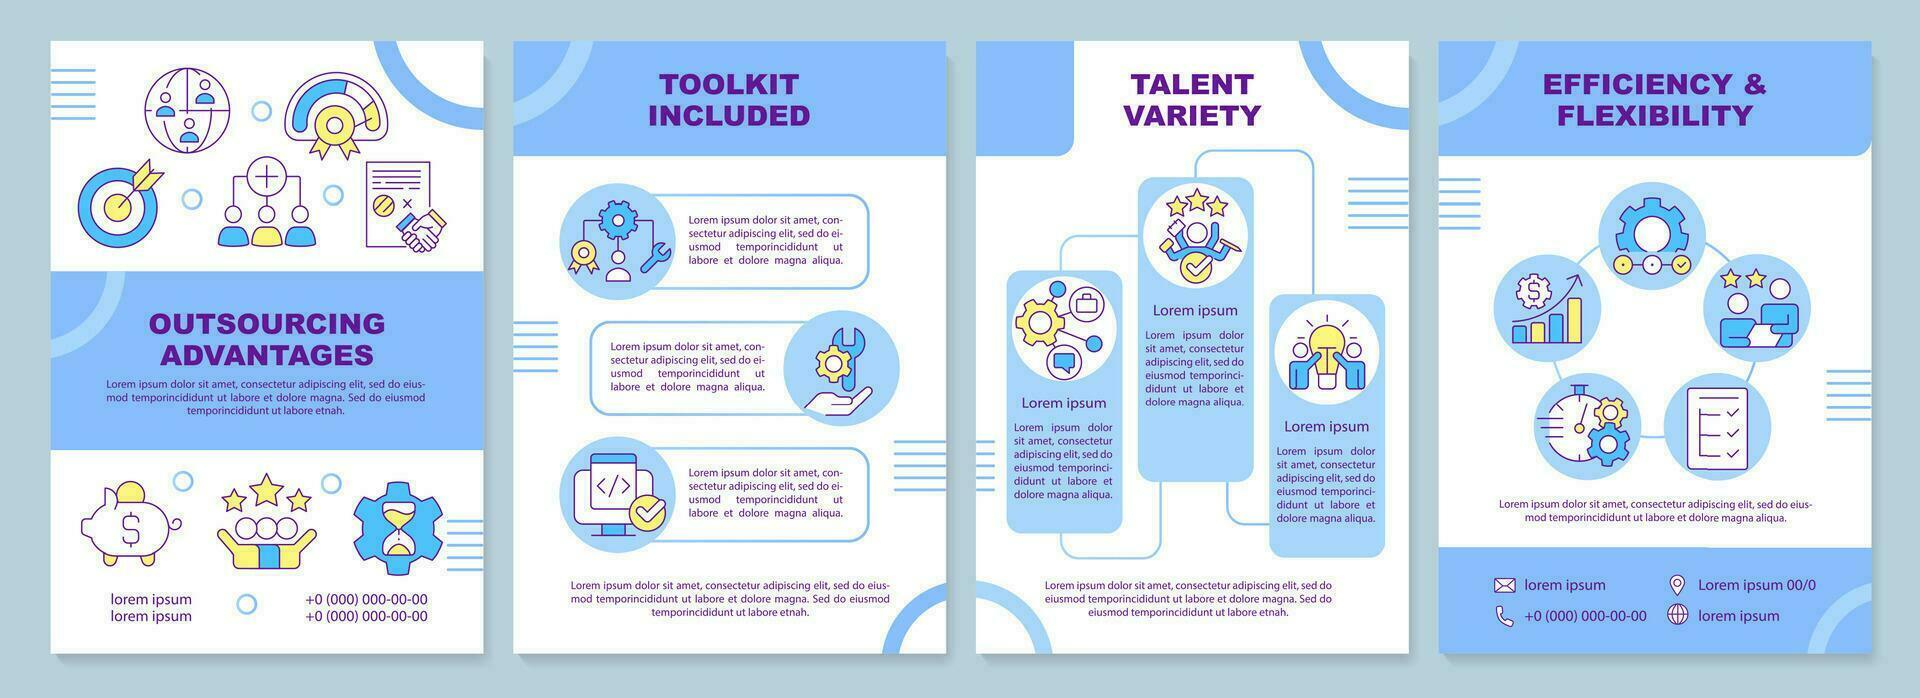 Outsourcing advantages blue brochure template. Talent variety. Leaflet design with linear icons. Editable 4 vector layouts for presentation, annual reports